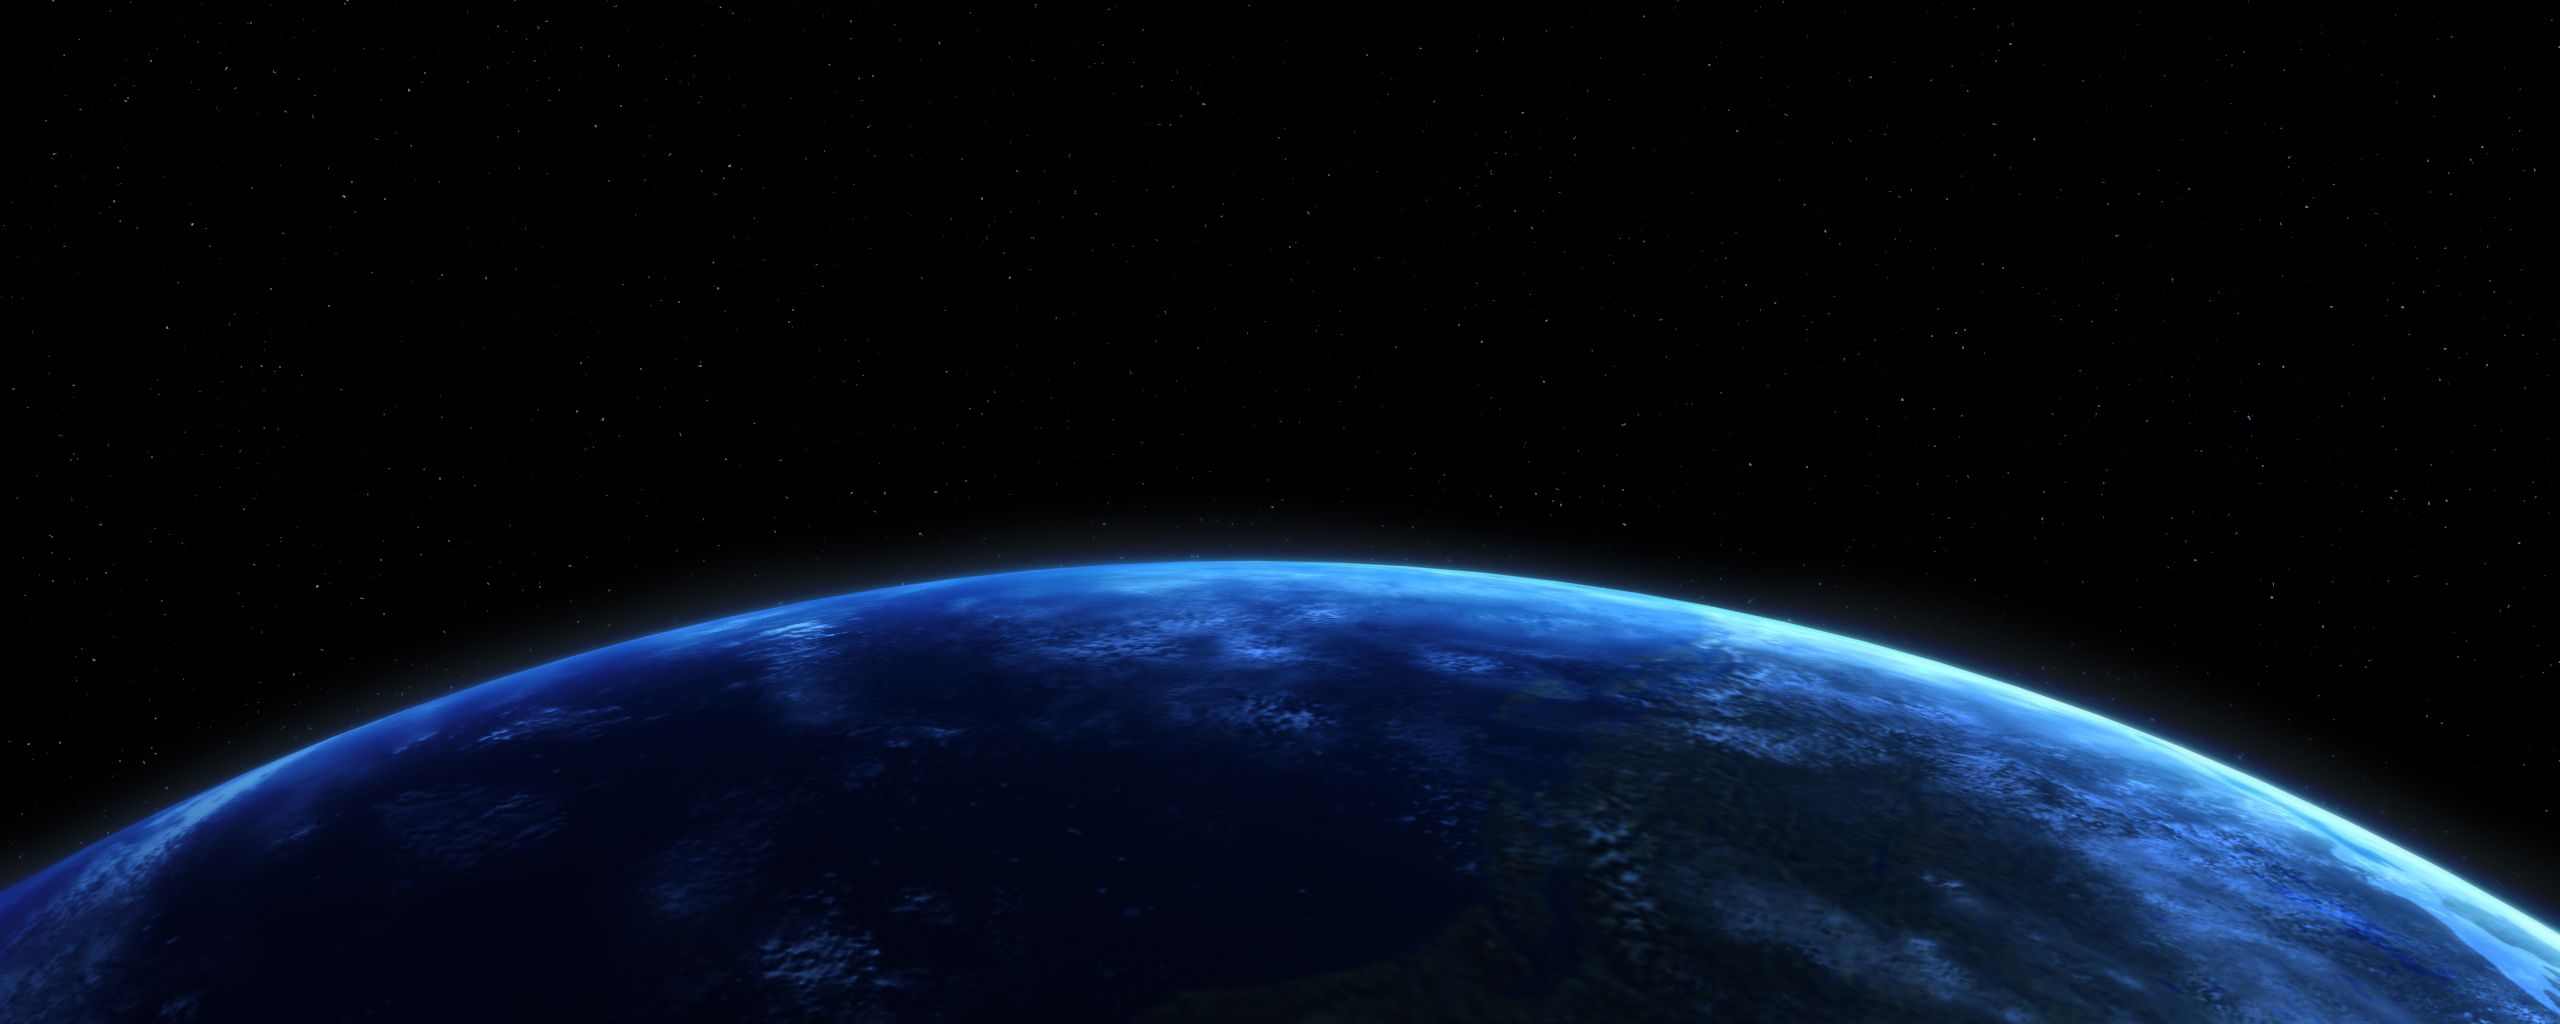 Blue Earth Wallpaper. Awesome Earth